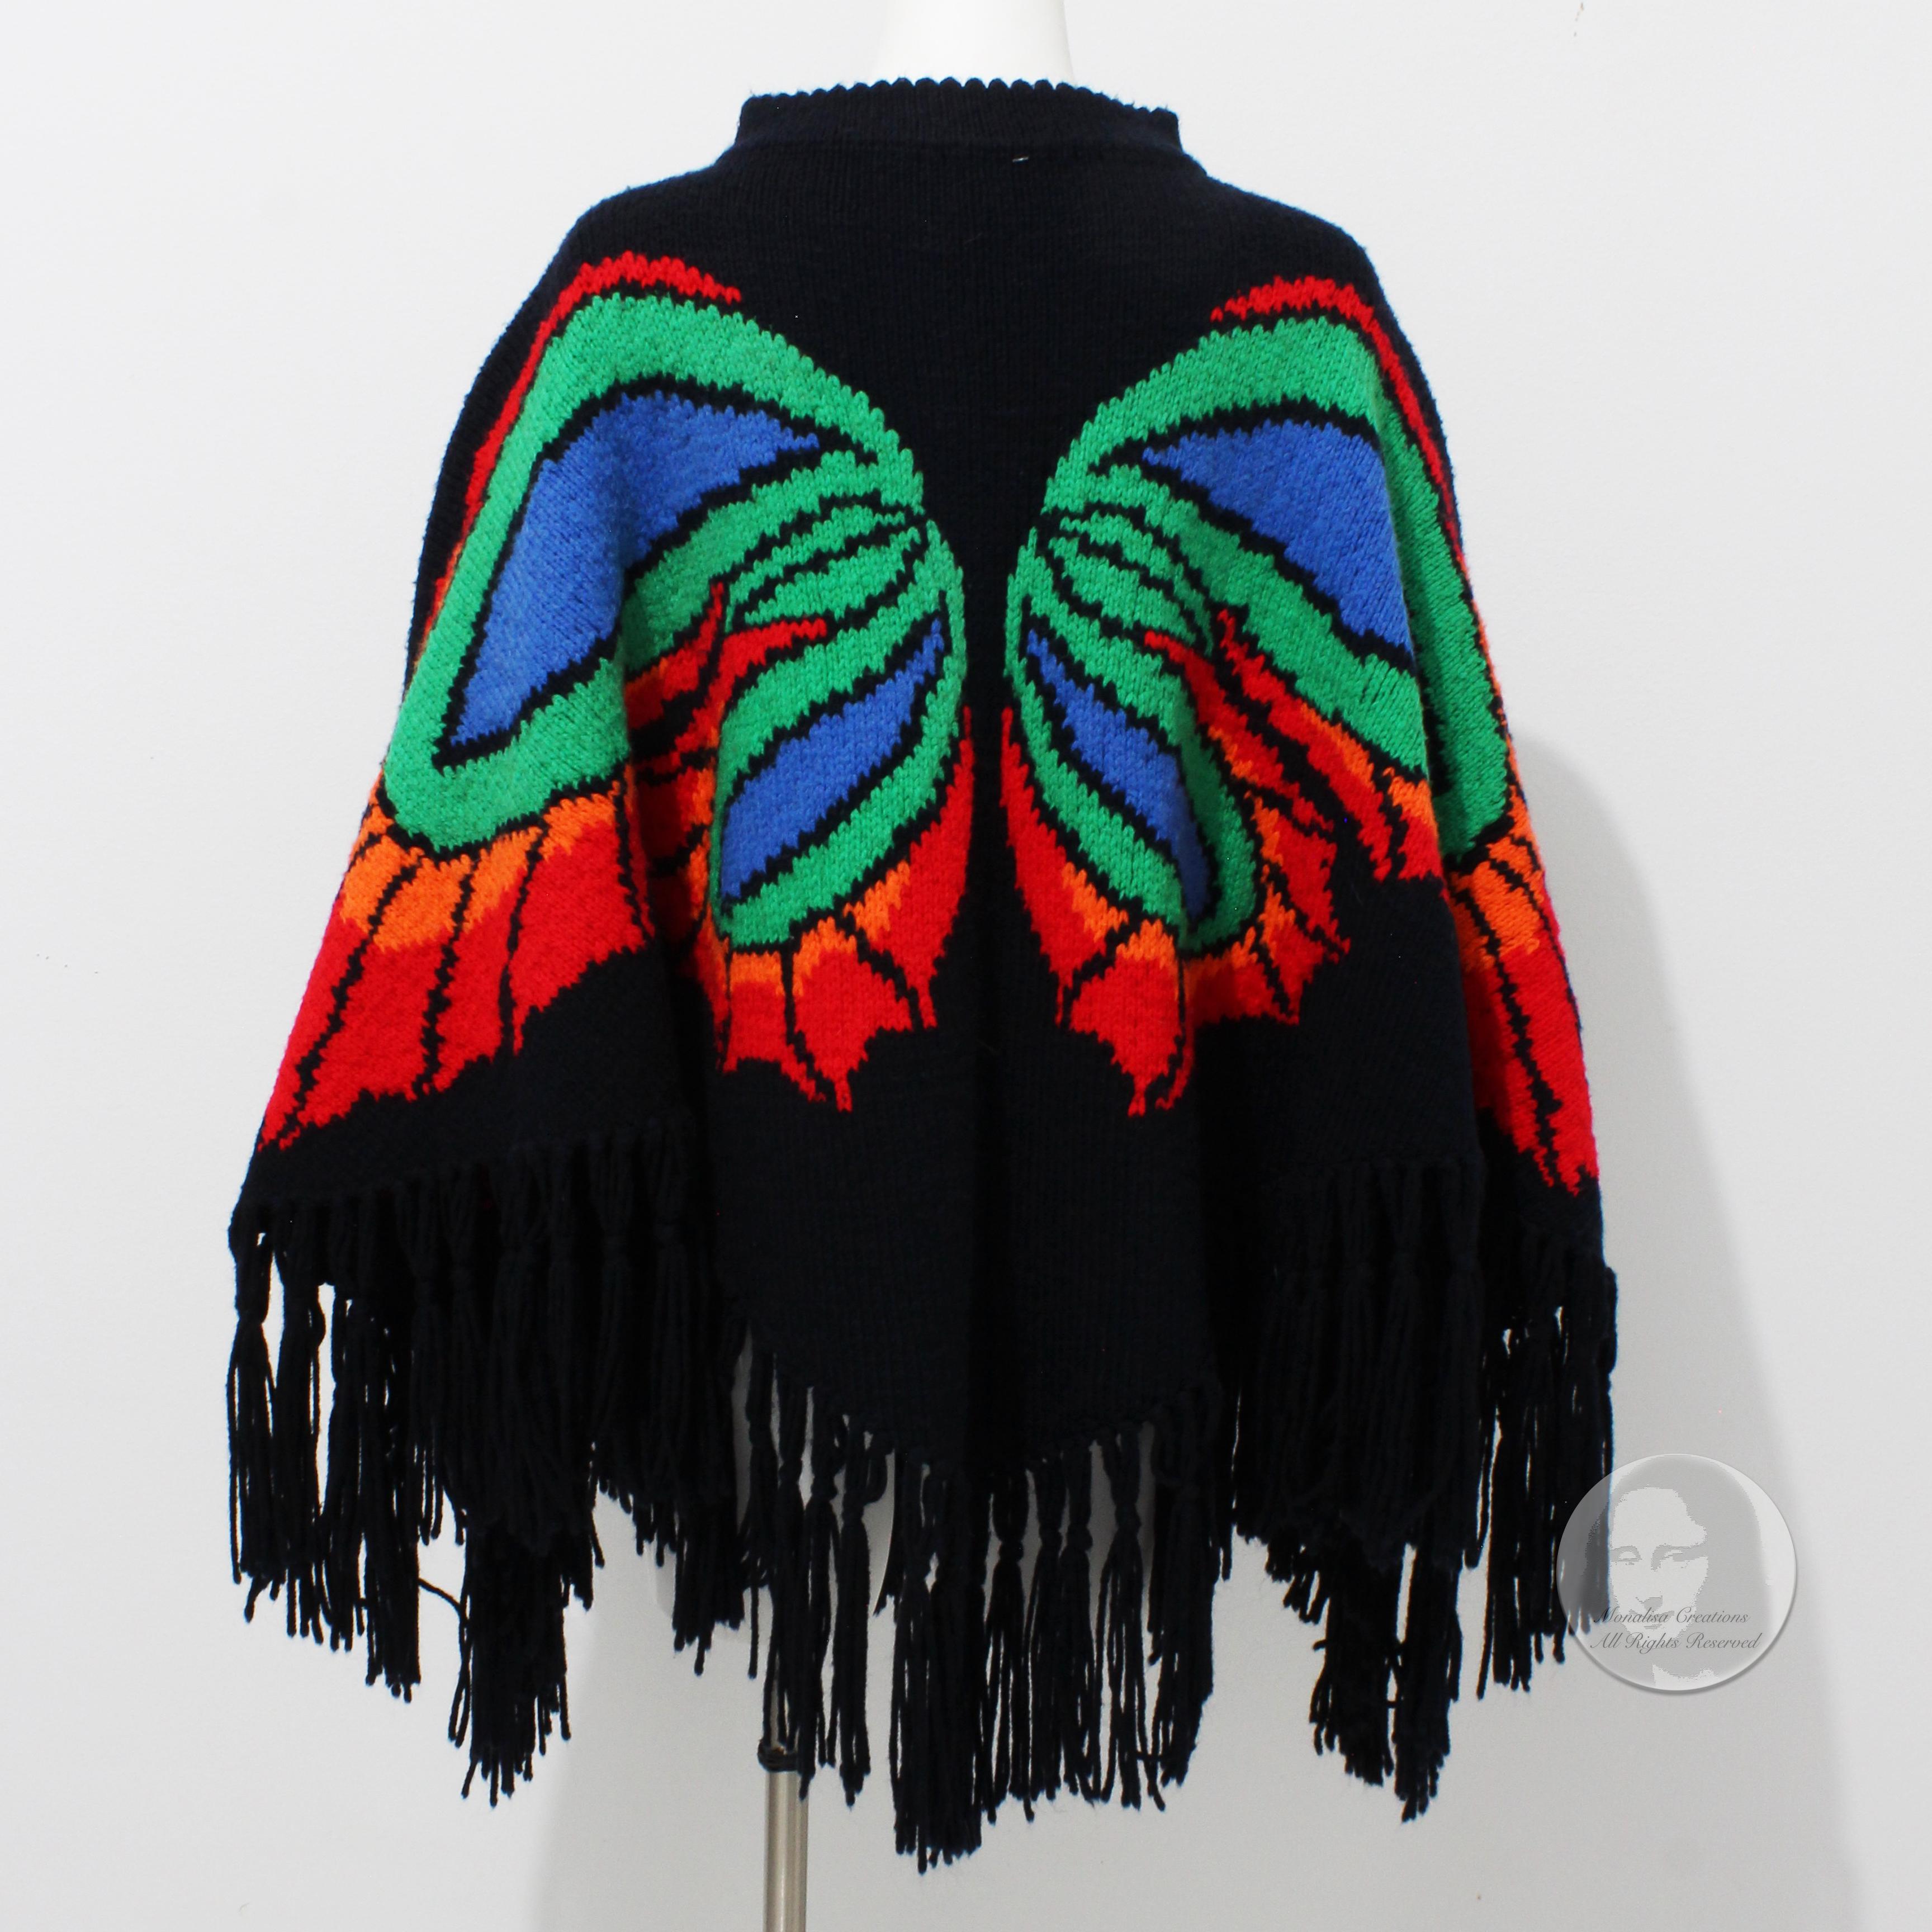 Butterfly Poncho Multicolor Knit with Fringe Trim Pullover Style Vintage OSFM  For Sale 1